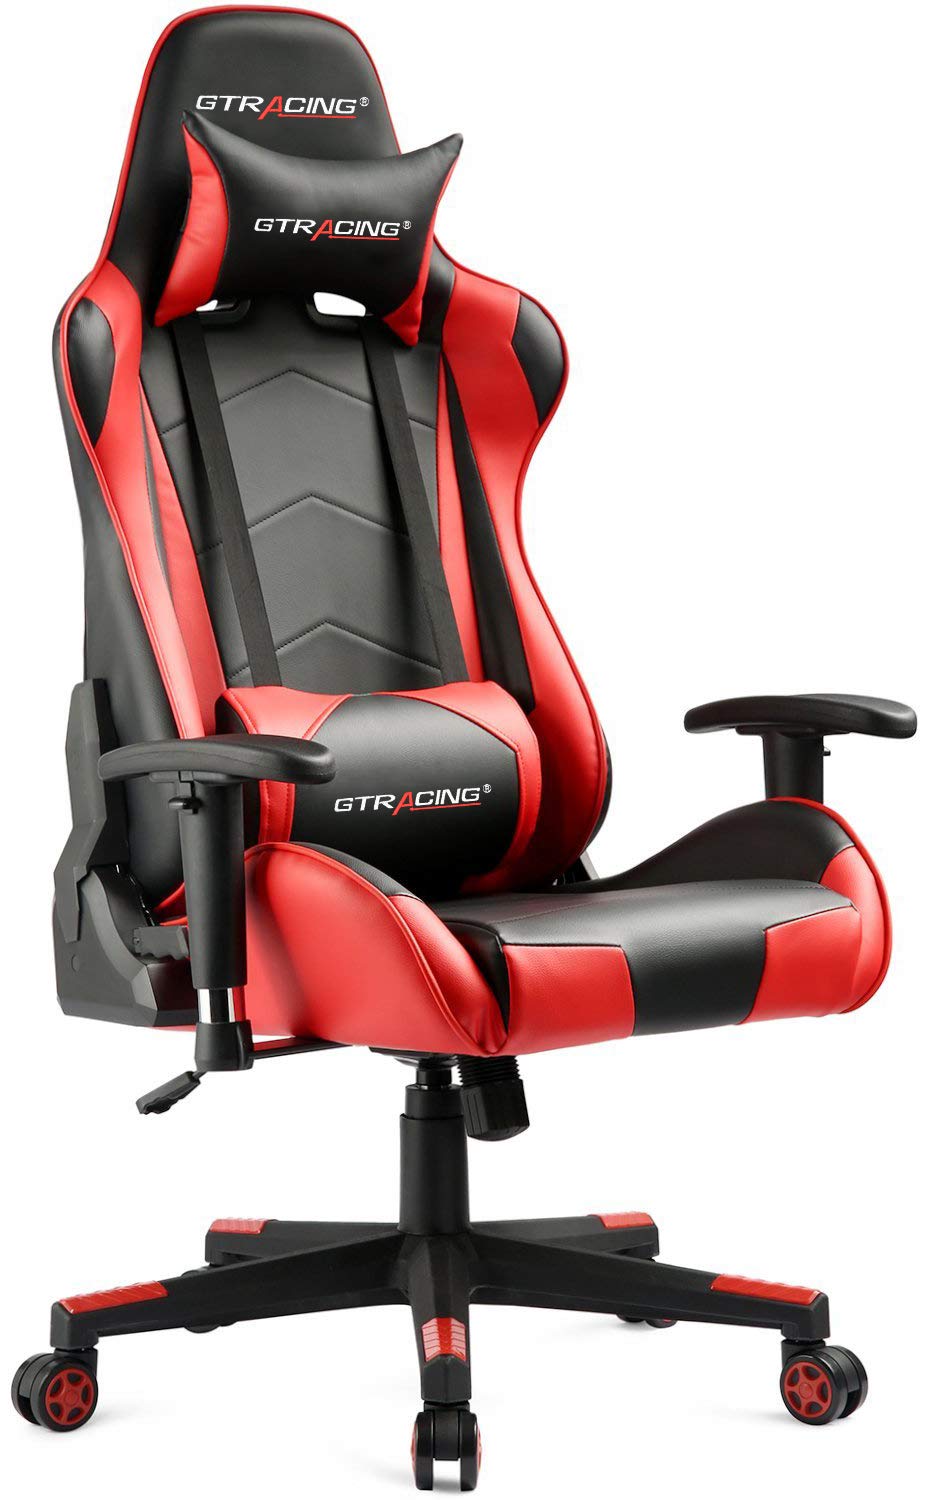 Logitech x Herman Miller partner up to create the ultimate gaming chair